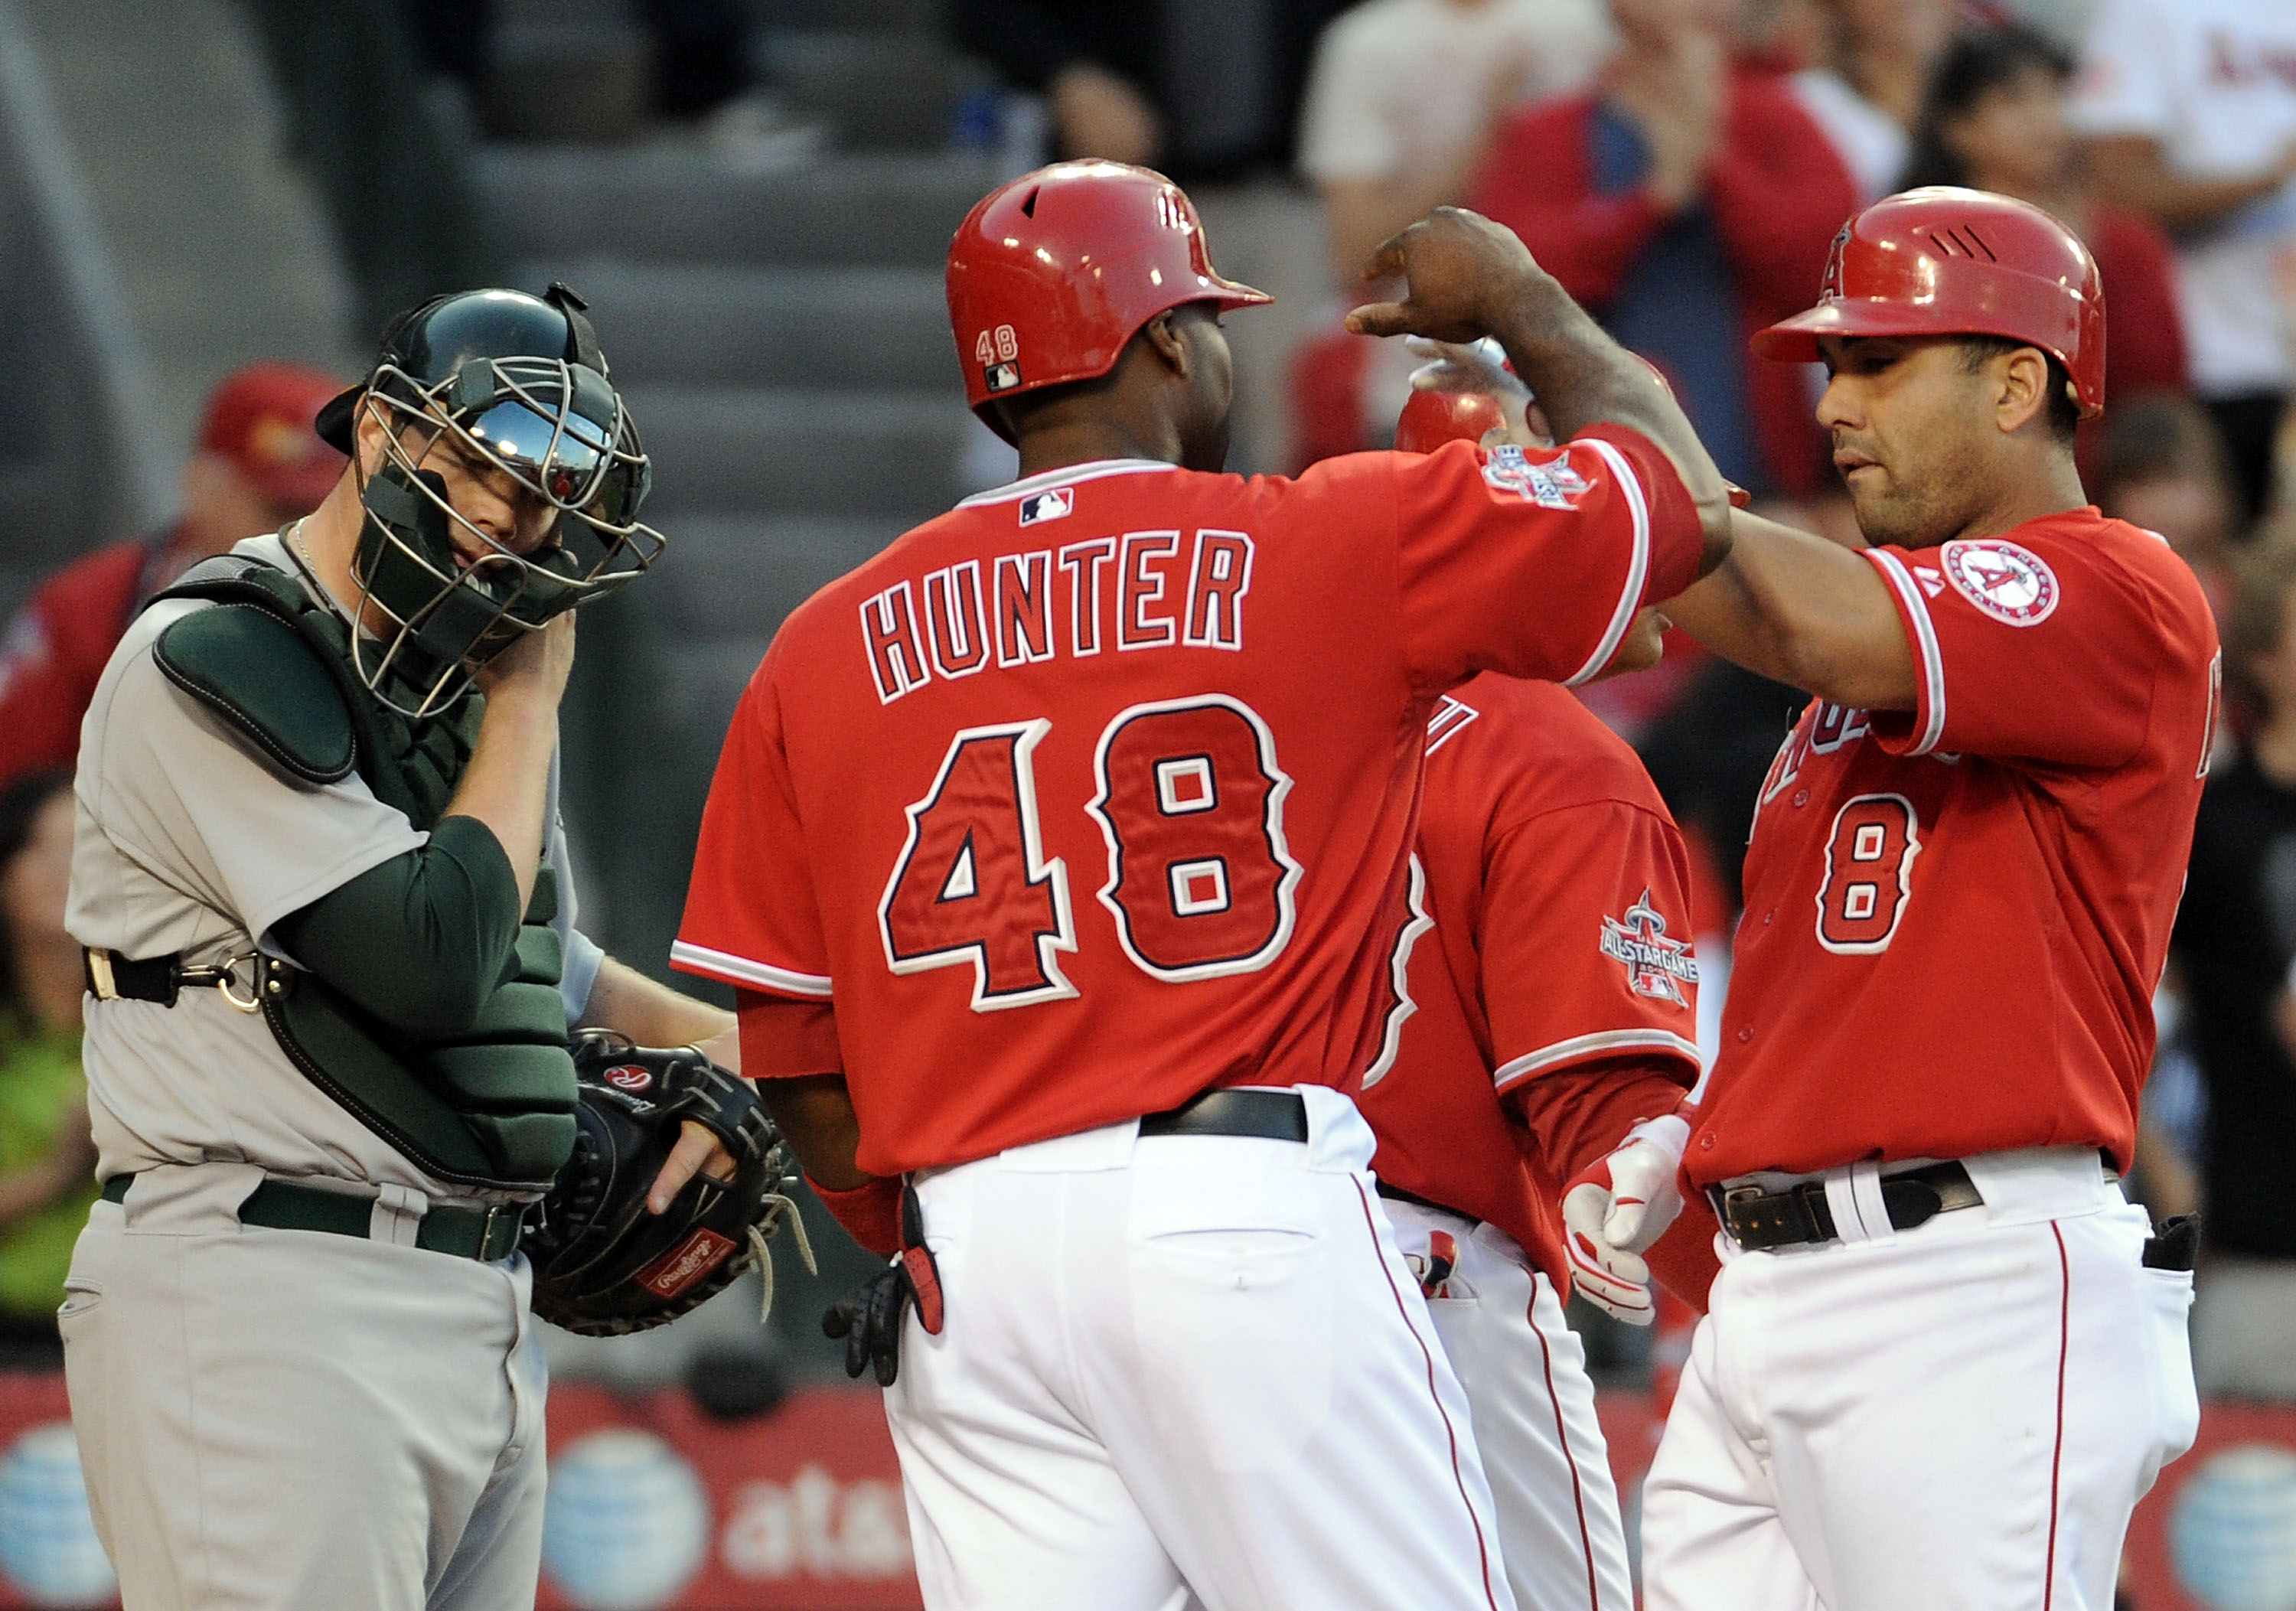 ANAHEIM, CA - MAY 15:  Landon Powell #35 of the Oakland Athletics reacts as Kendry Morales #8 and Torii Hunter #48 of the Los Angeles Angels celebrate a three run homerun during the fourth inning at Angels Stadium on May 15, 2010 in Anaheim, California.